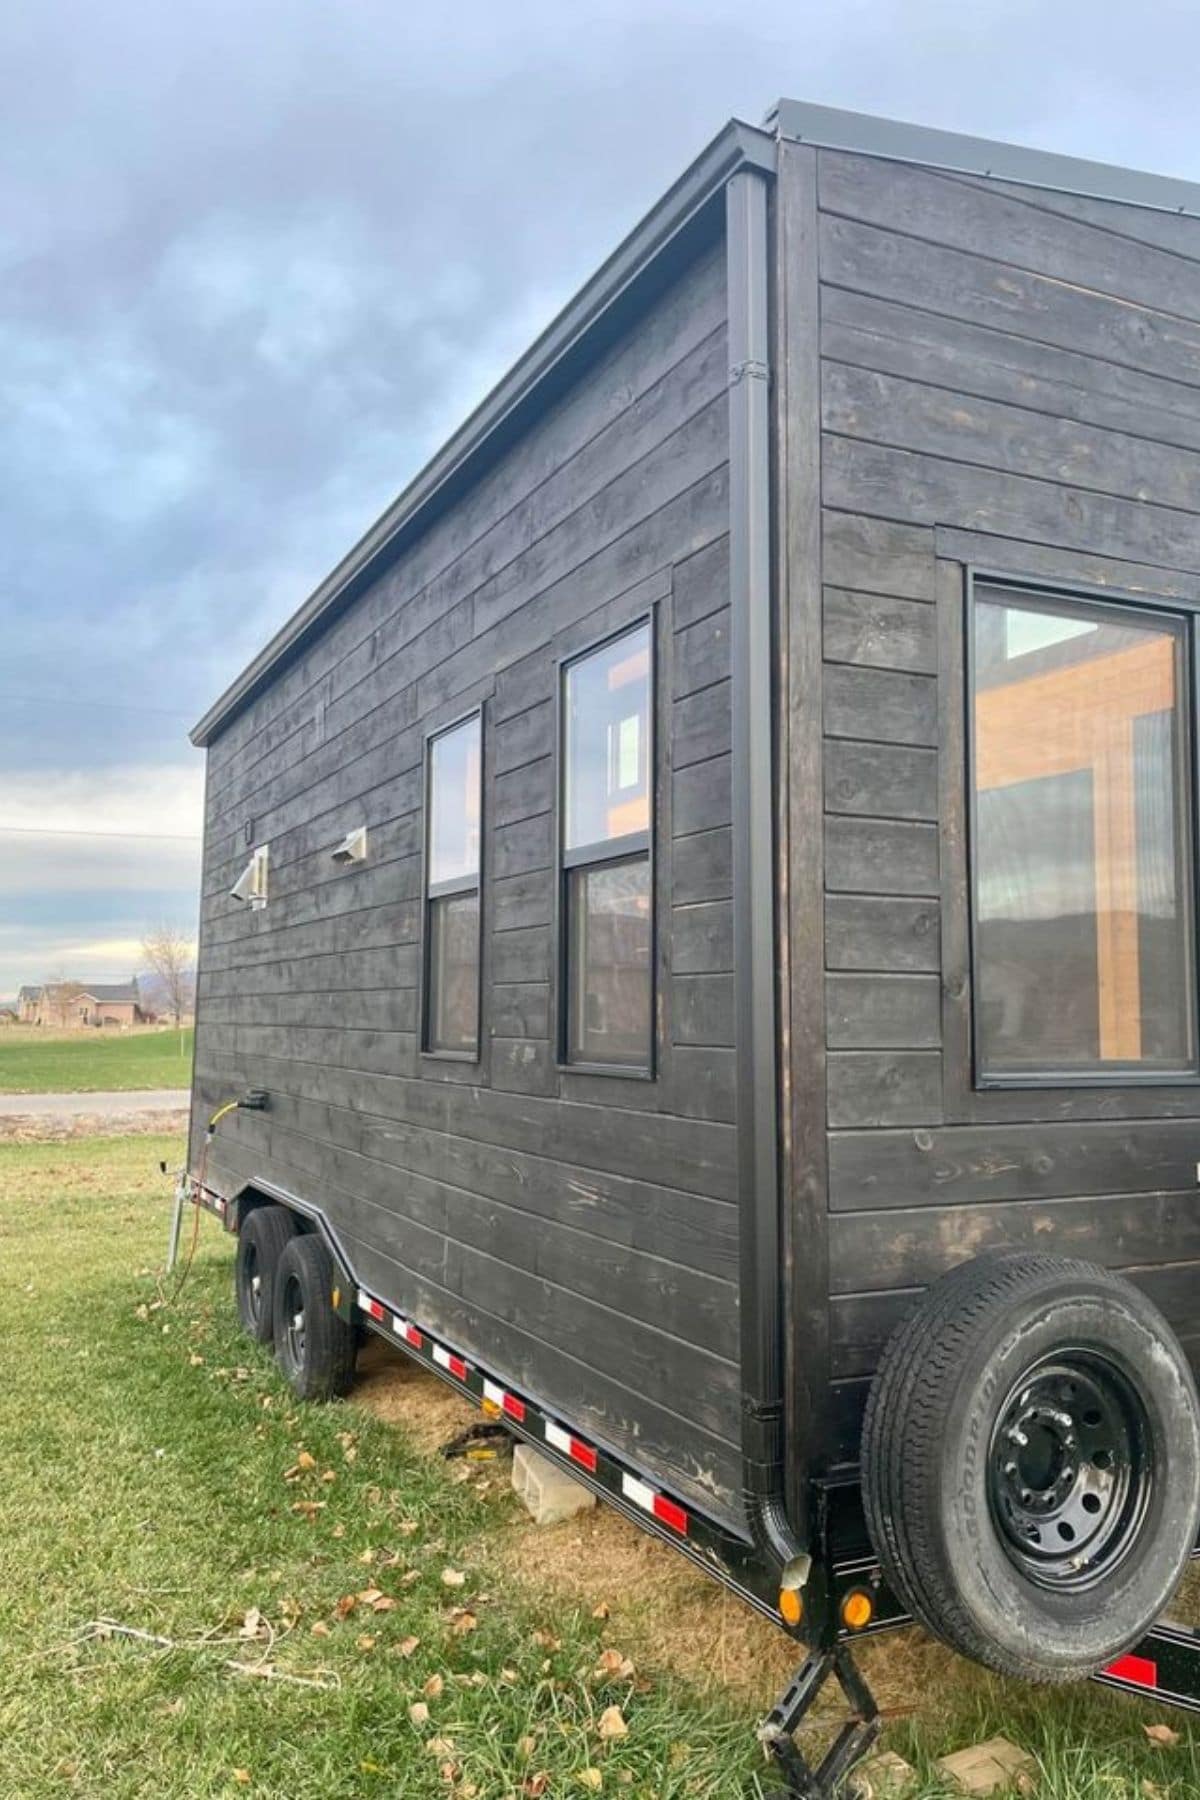 back side of tiny home with black stained wood siding